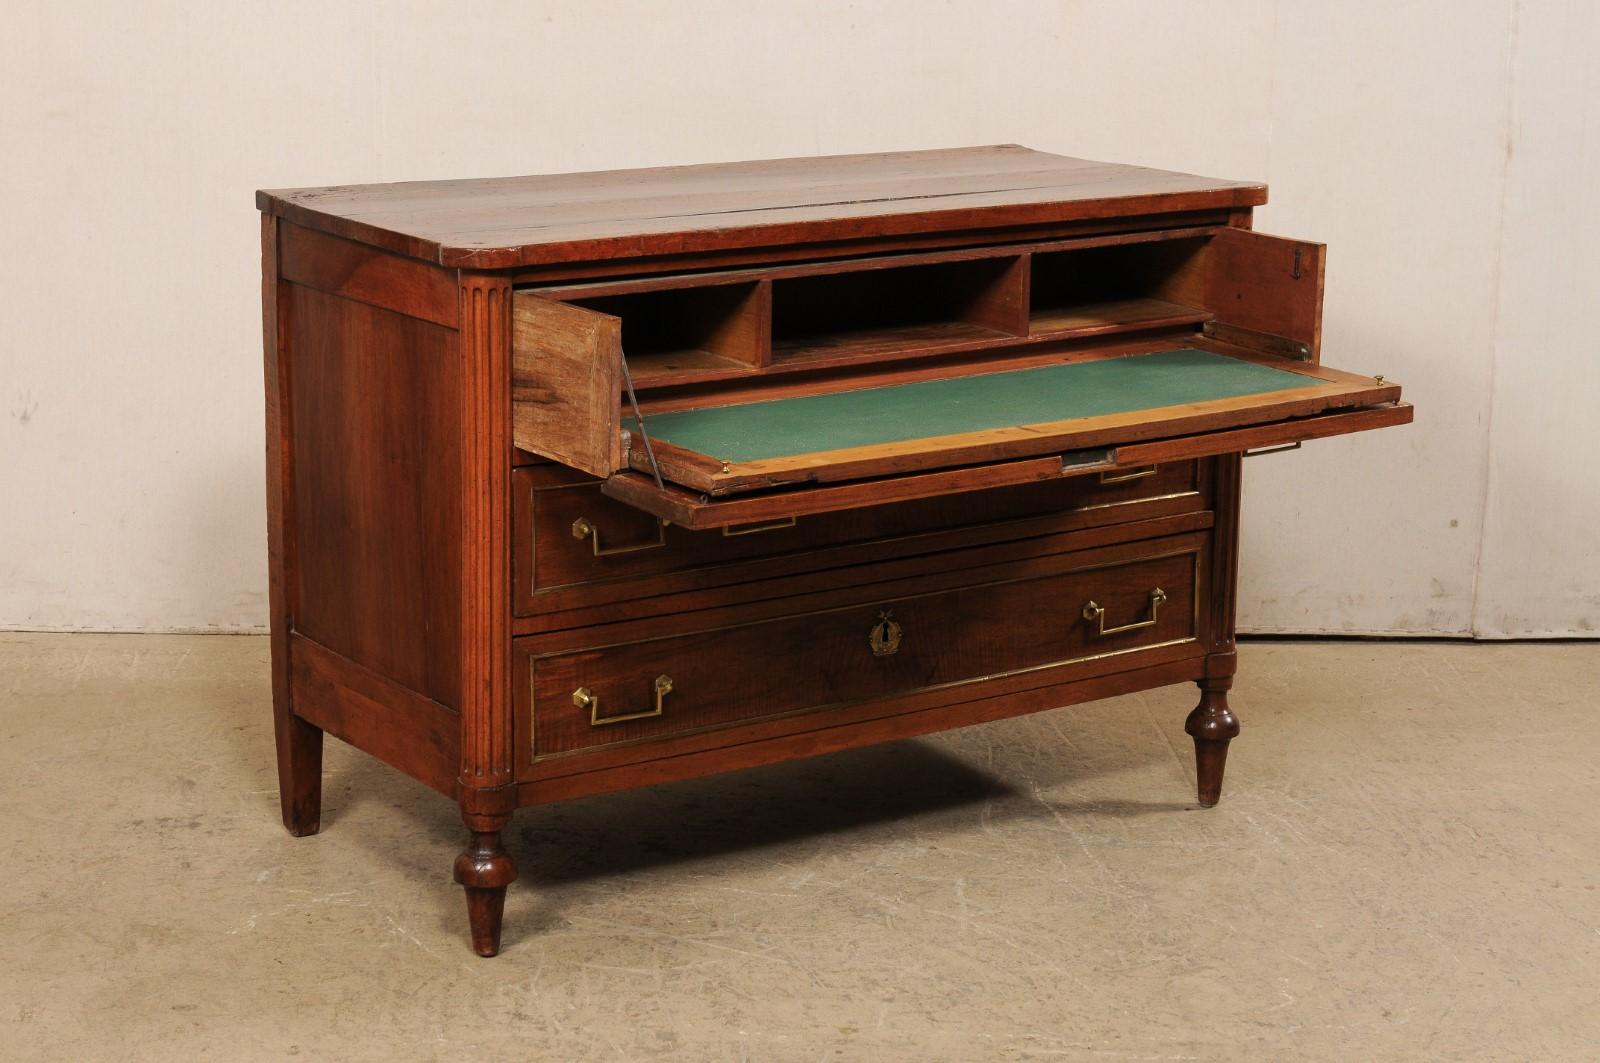 Wood Neoclassic Period French Commode W/Hidden Butler's Secretary & Writing Desk For Sale